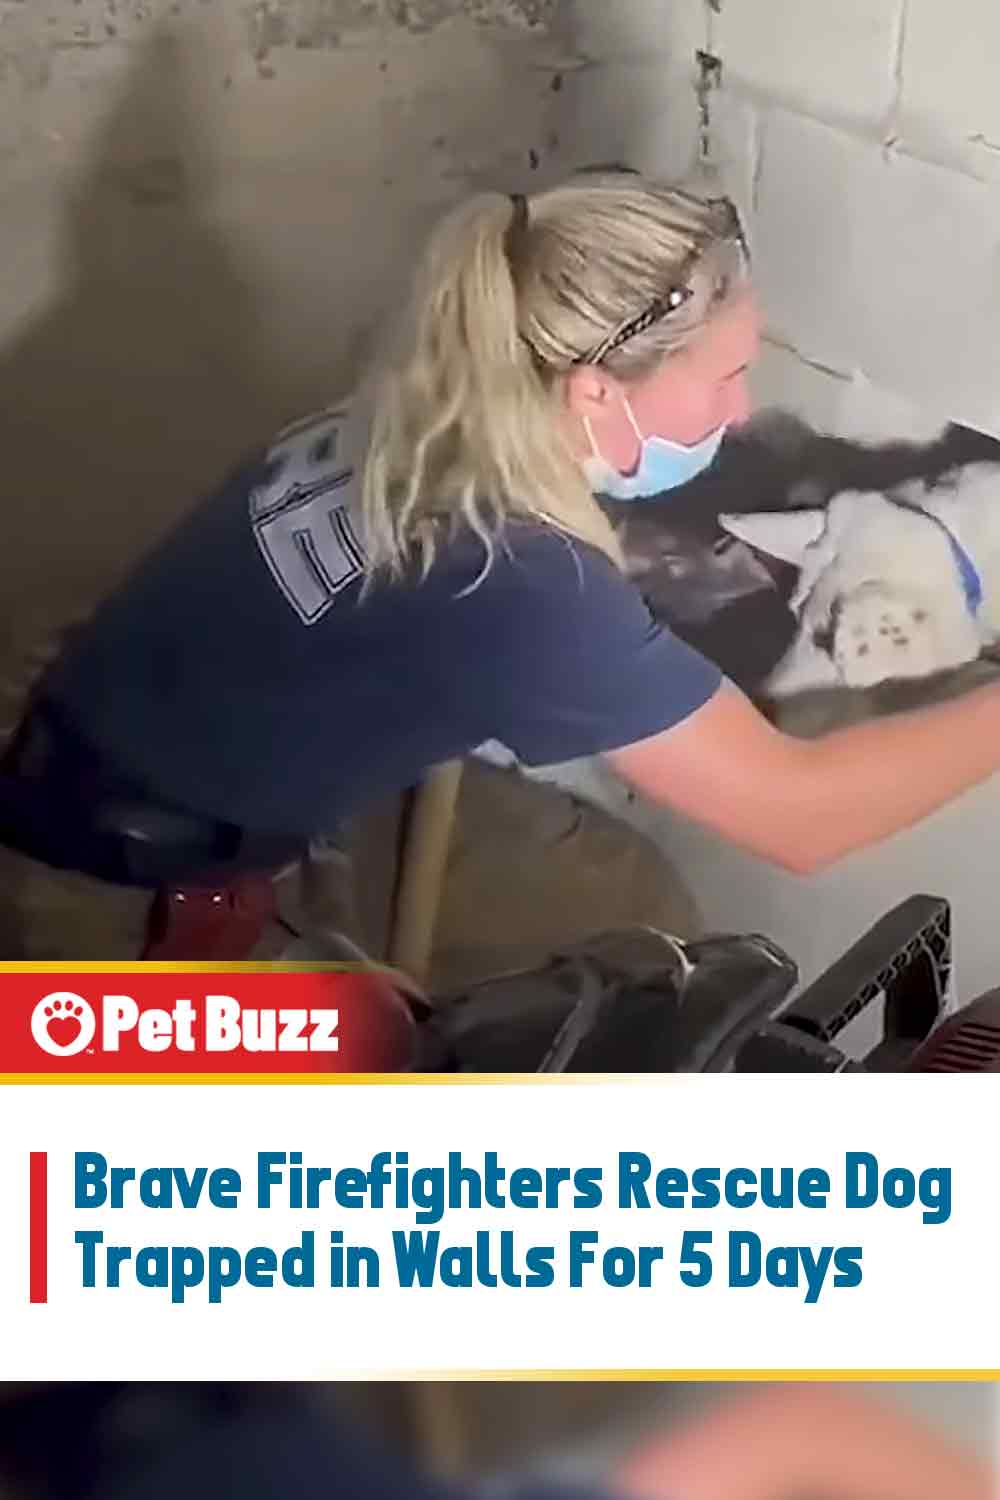 Brave Firefighters Rescue Dog Trapped in Walls For 5 Days